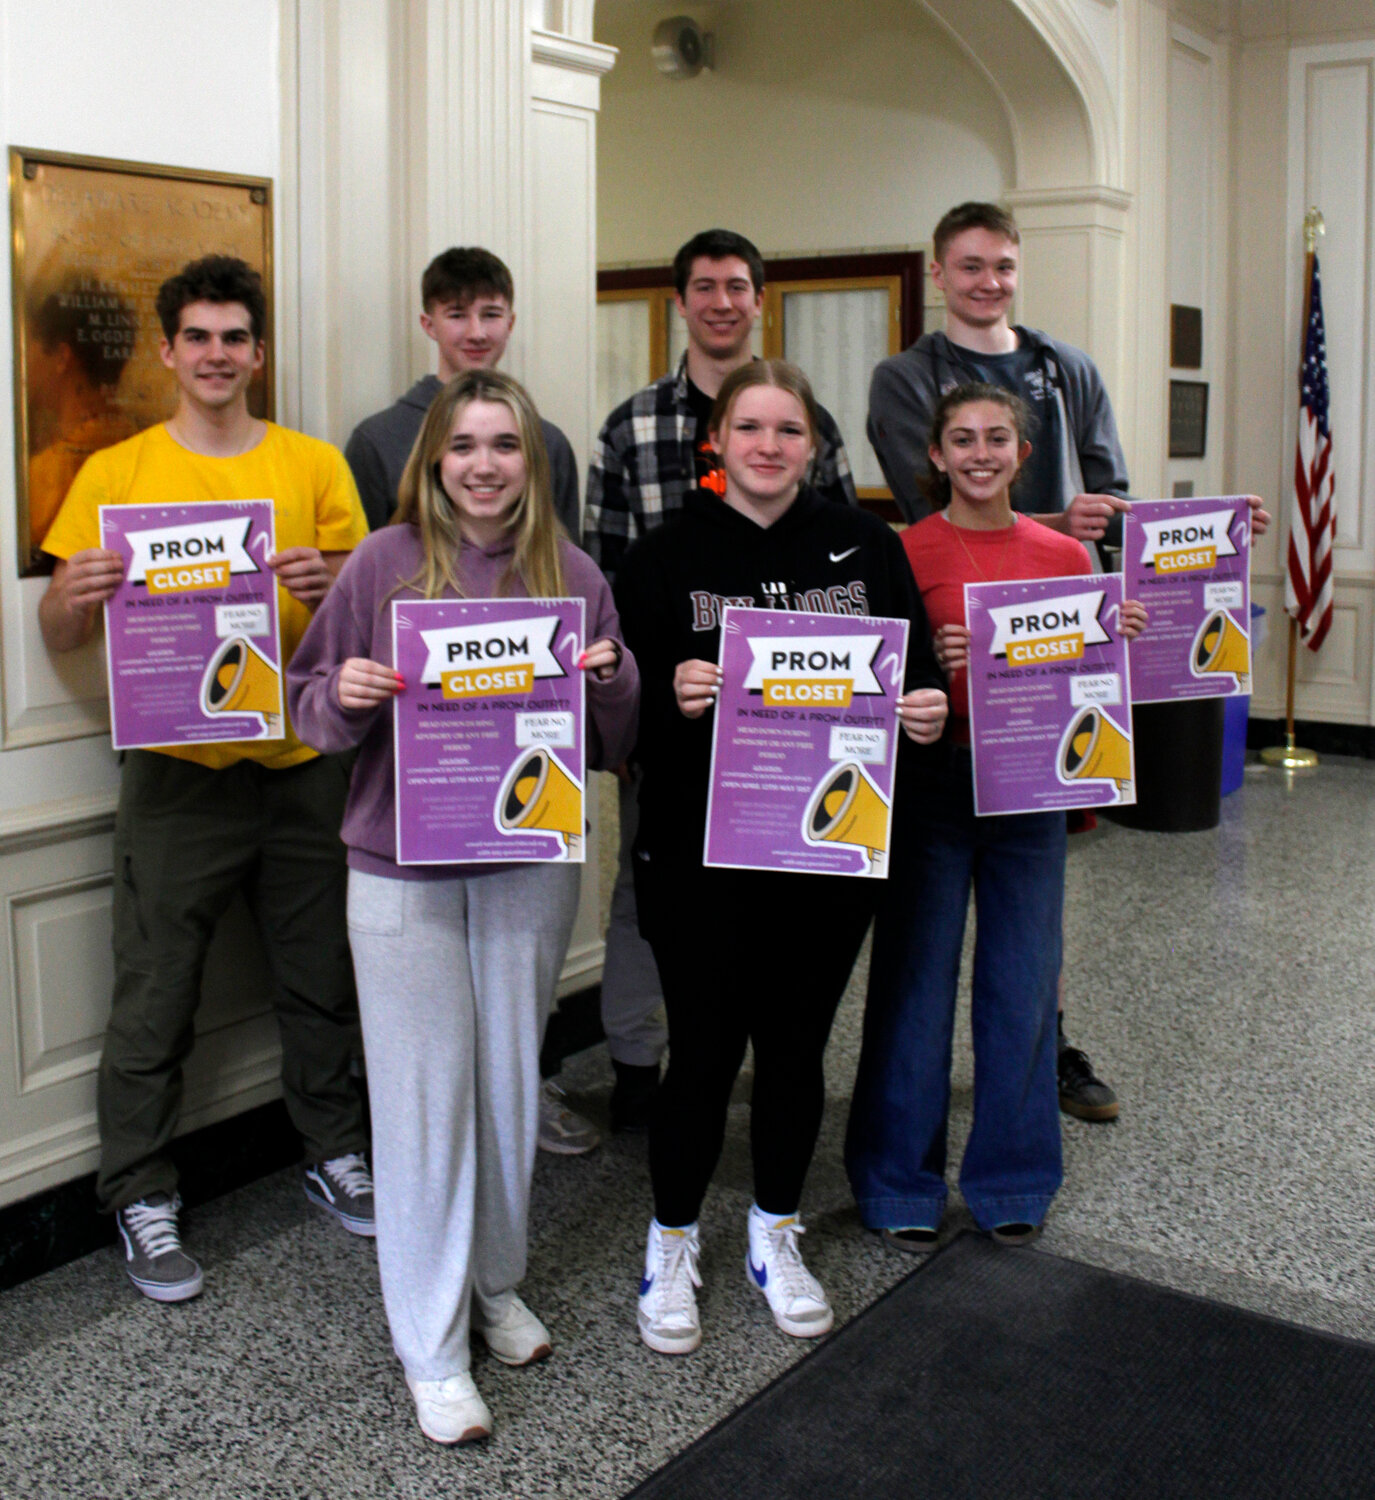 Delaware Academy juniors hold posters for their community project, the Prom Closet. Pictured are (front row) Natalie Anderson, Brinley Wager, Abby Tessier, and (back row) Isaac Marsiglio, Ivan Richardson, Rocco Schnabel and Seamus deMauro.